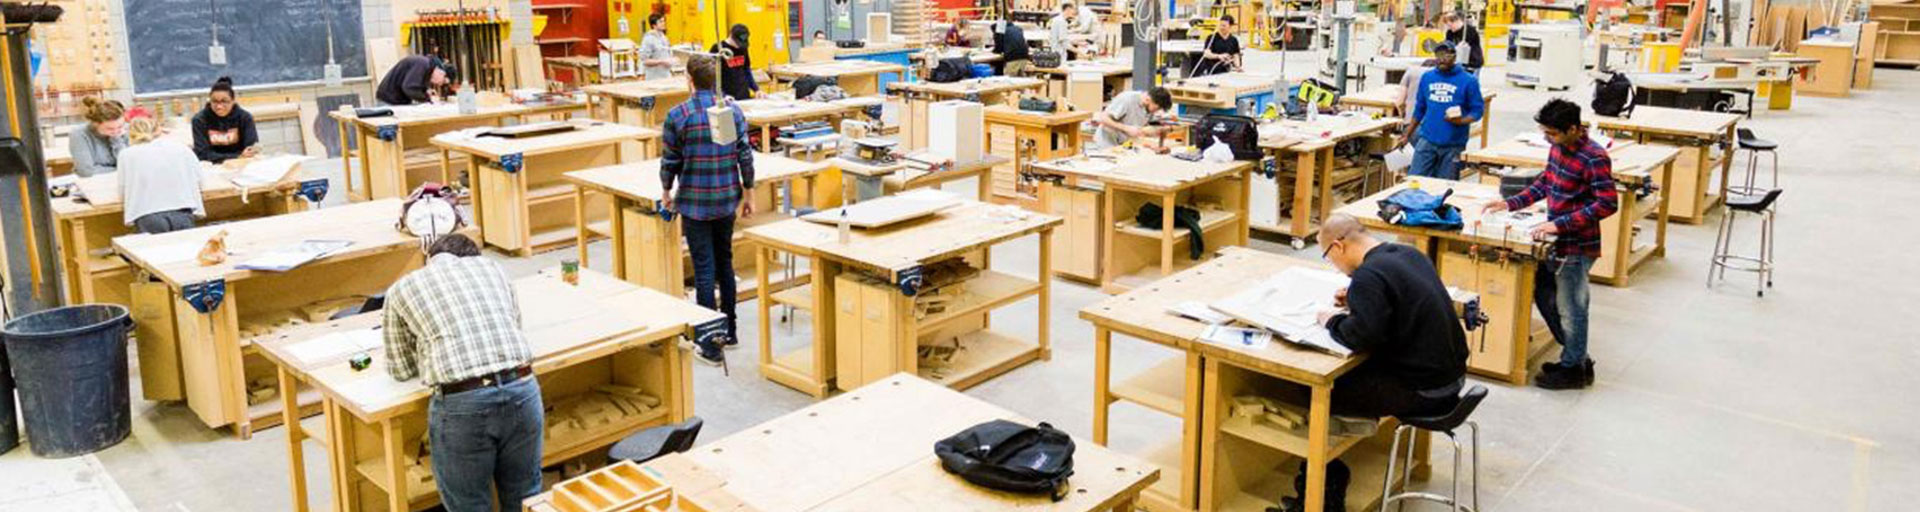 The woordWorking Galery: Business Expenses Woodworking